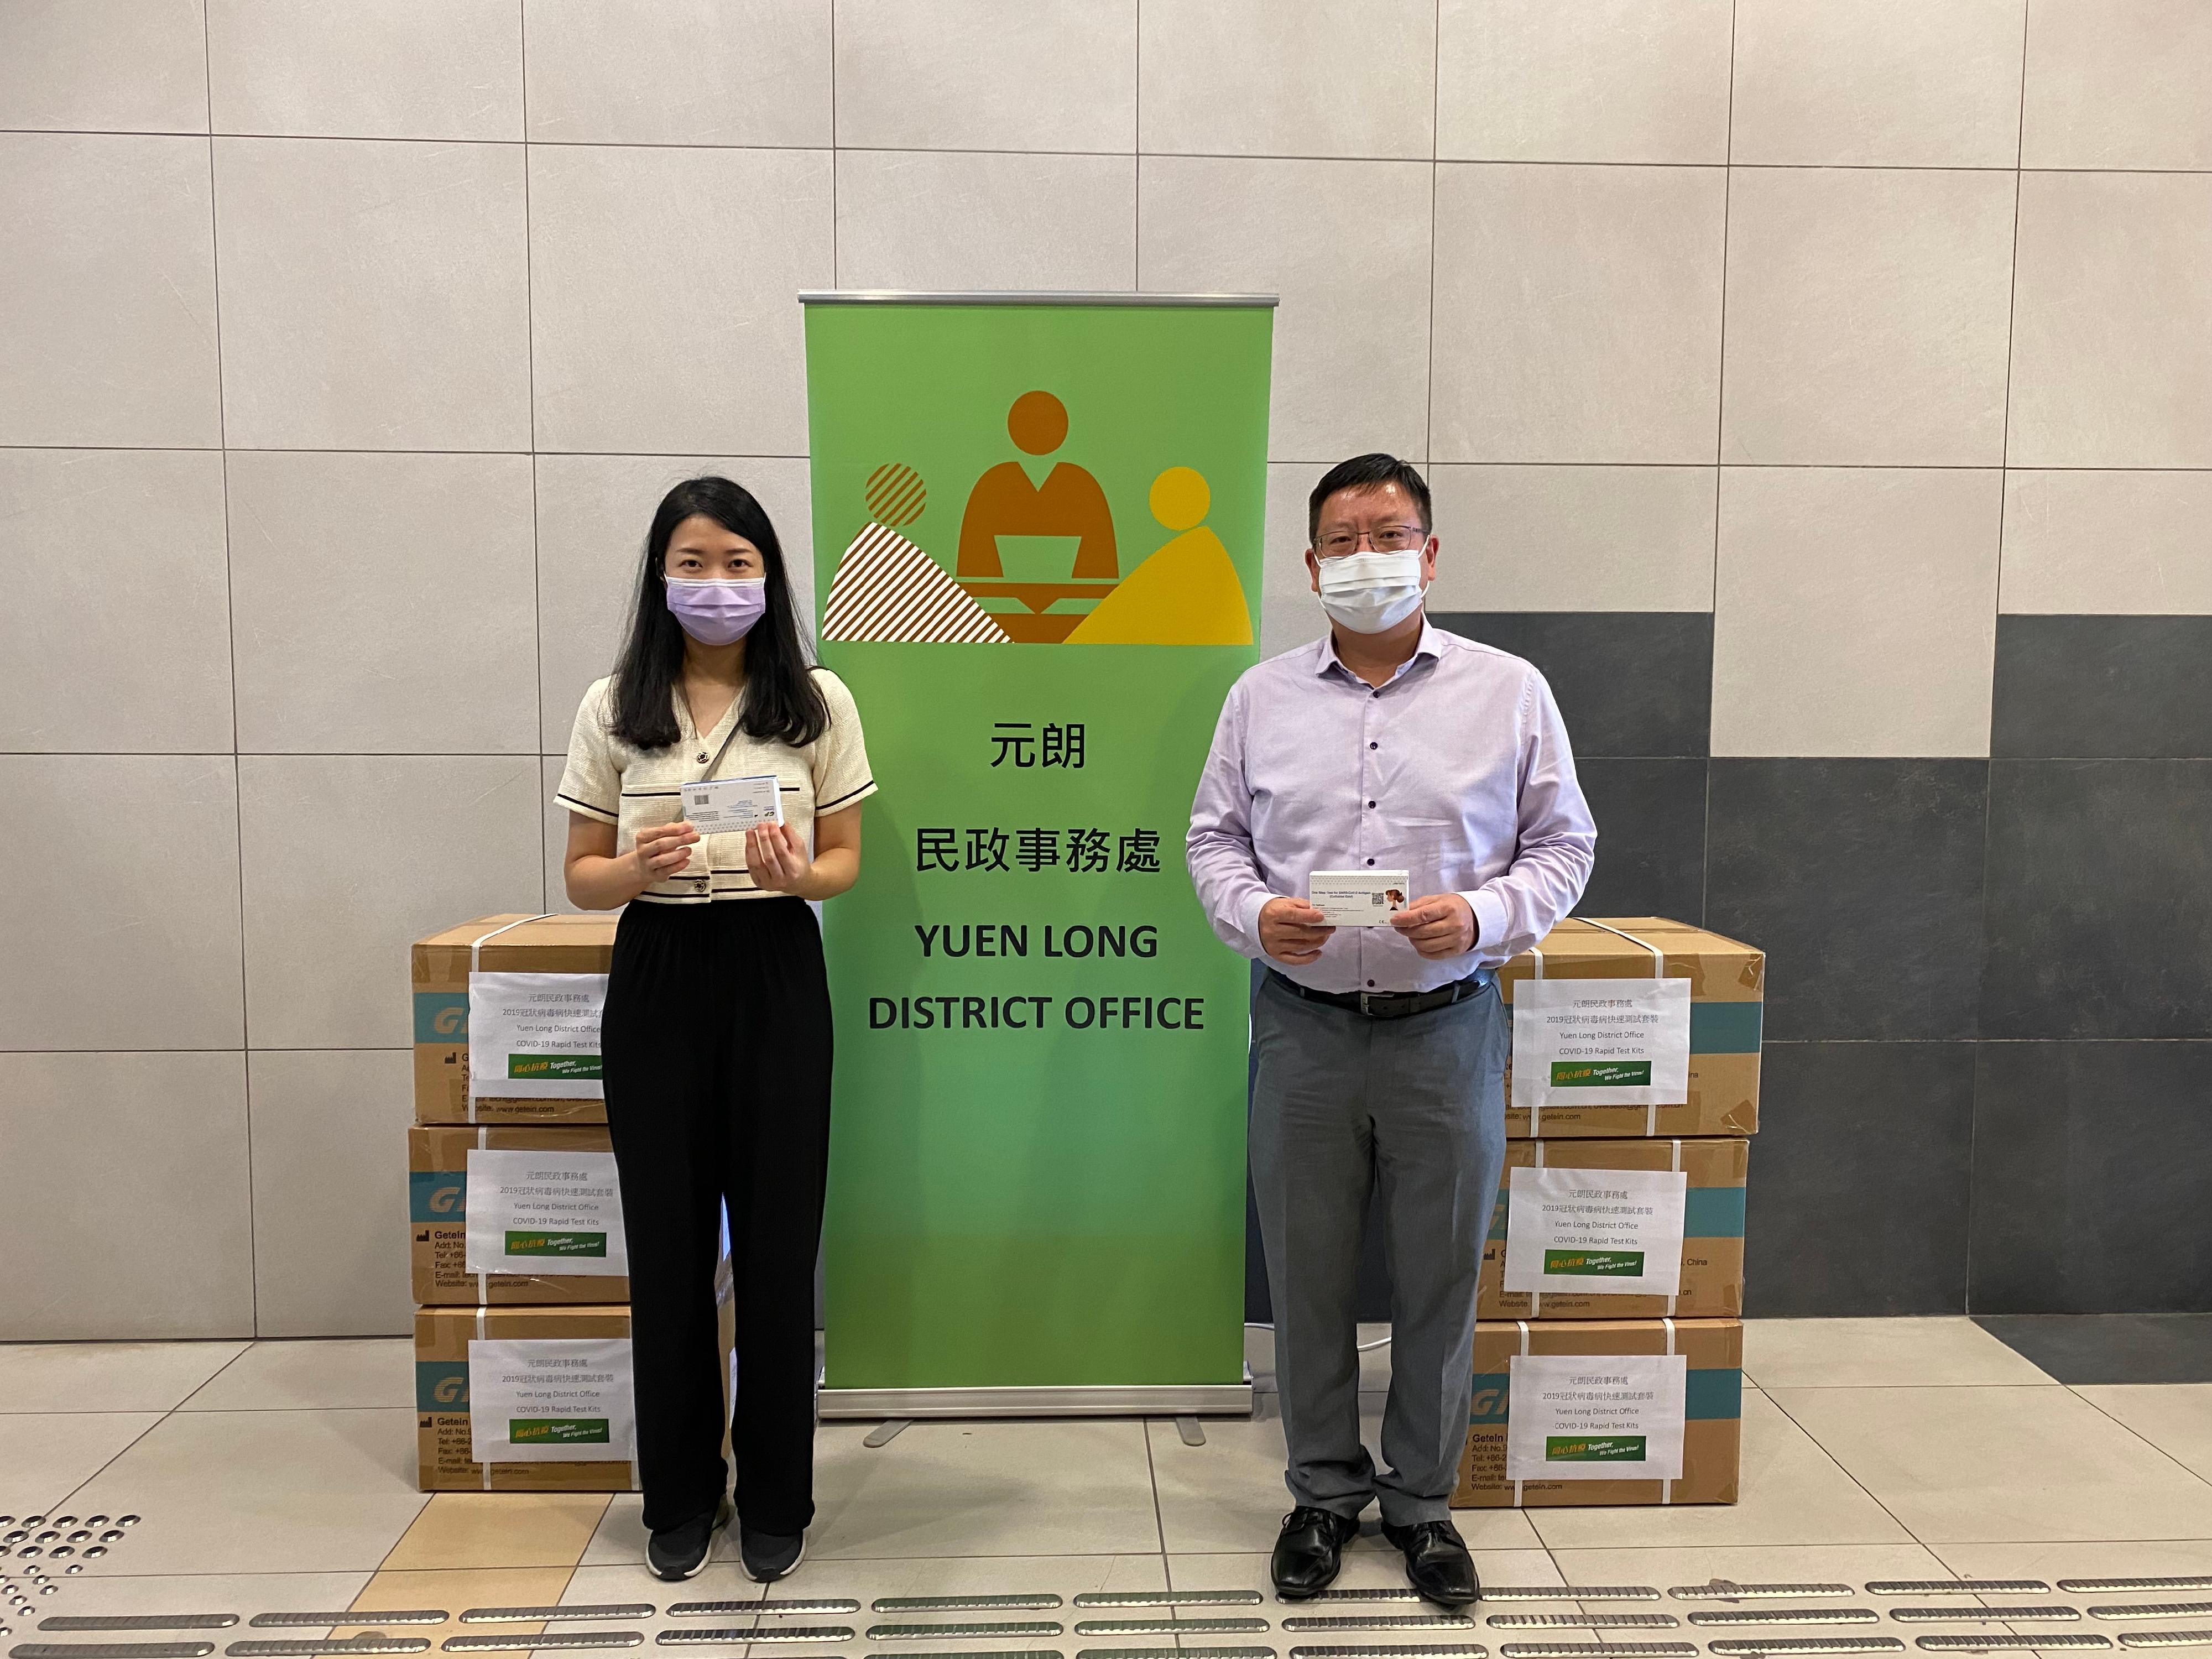 The Yuen Long District Office today (August 2) distributed COVID-19 rapid test kits to households, cleansing workers and property management staff living and working in Tin Shing Court for voluntary testing through the property management company.